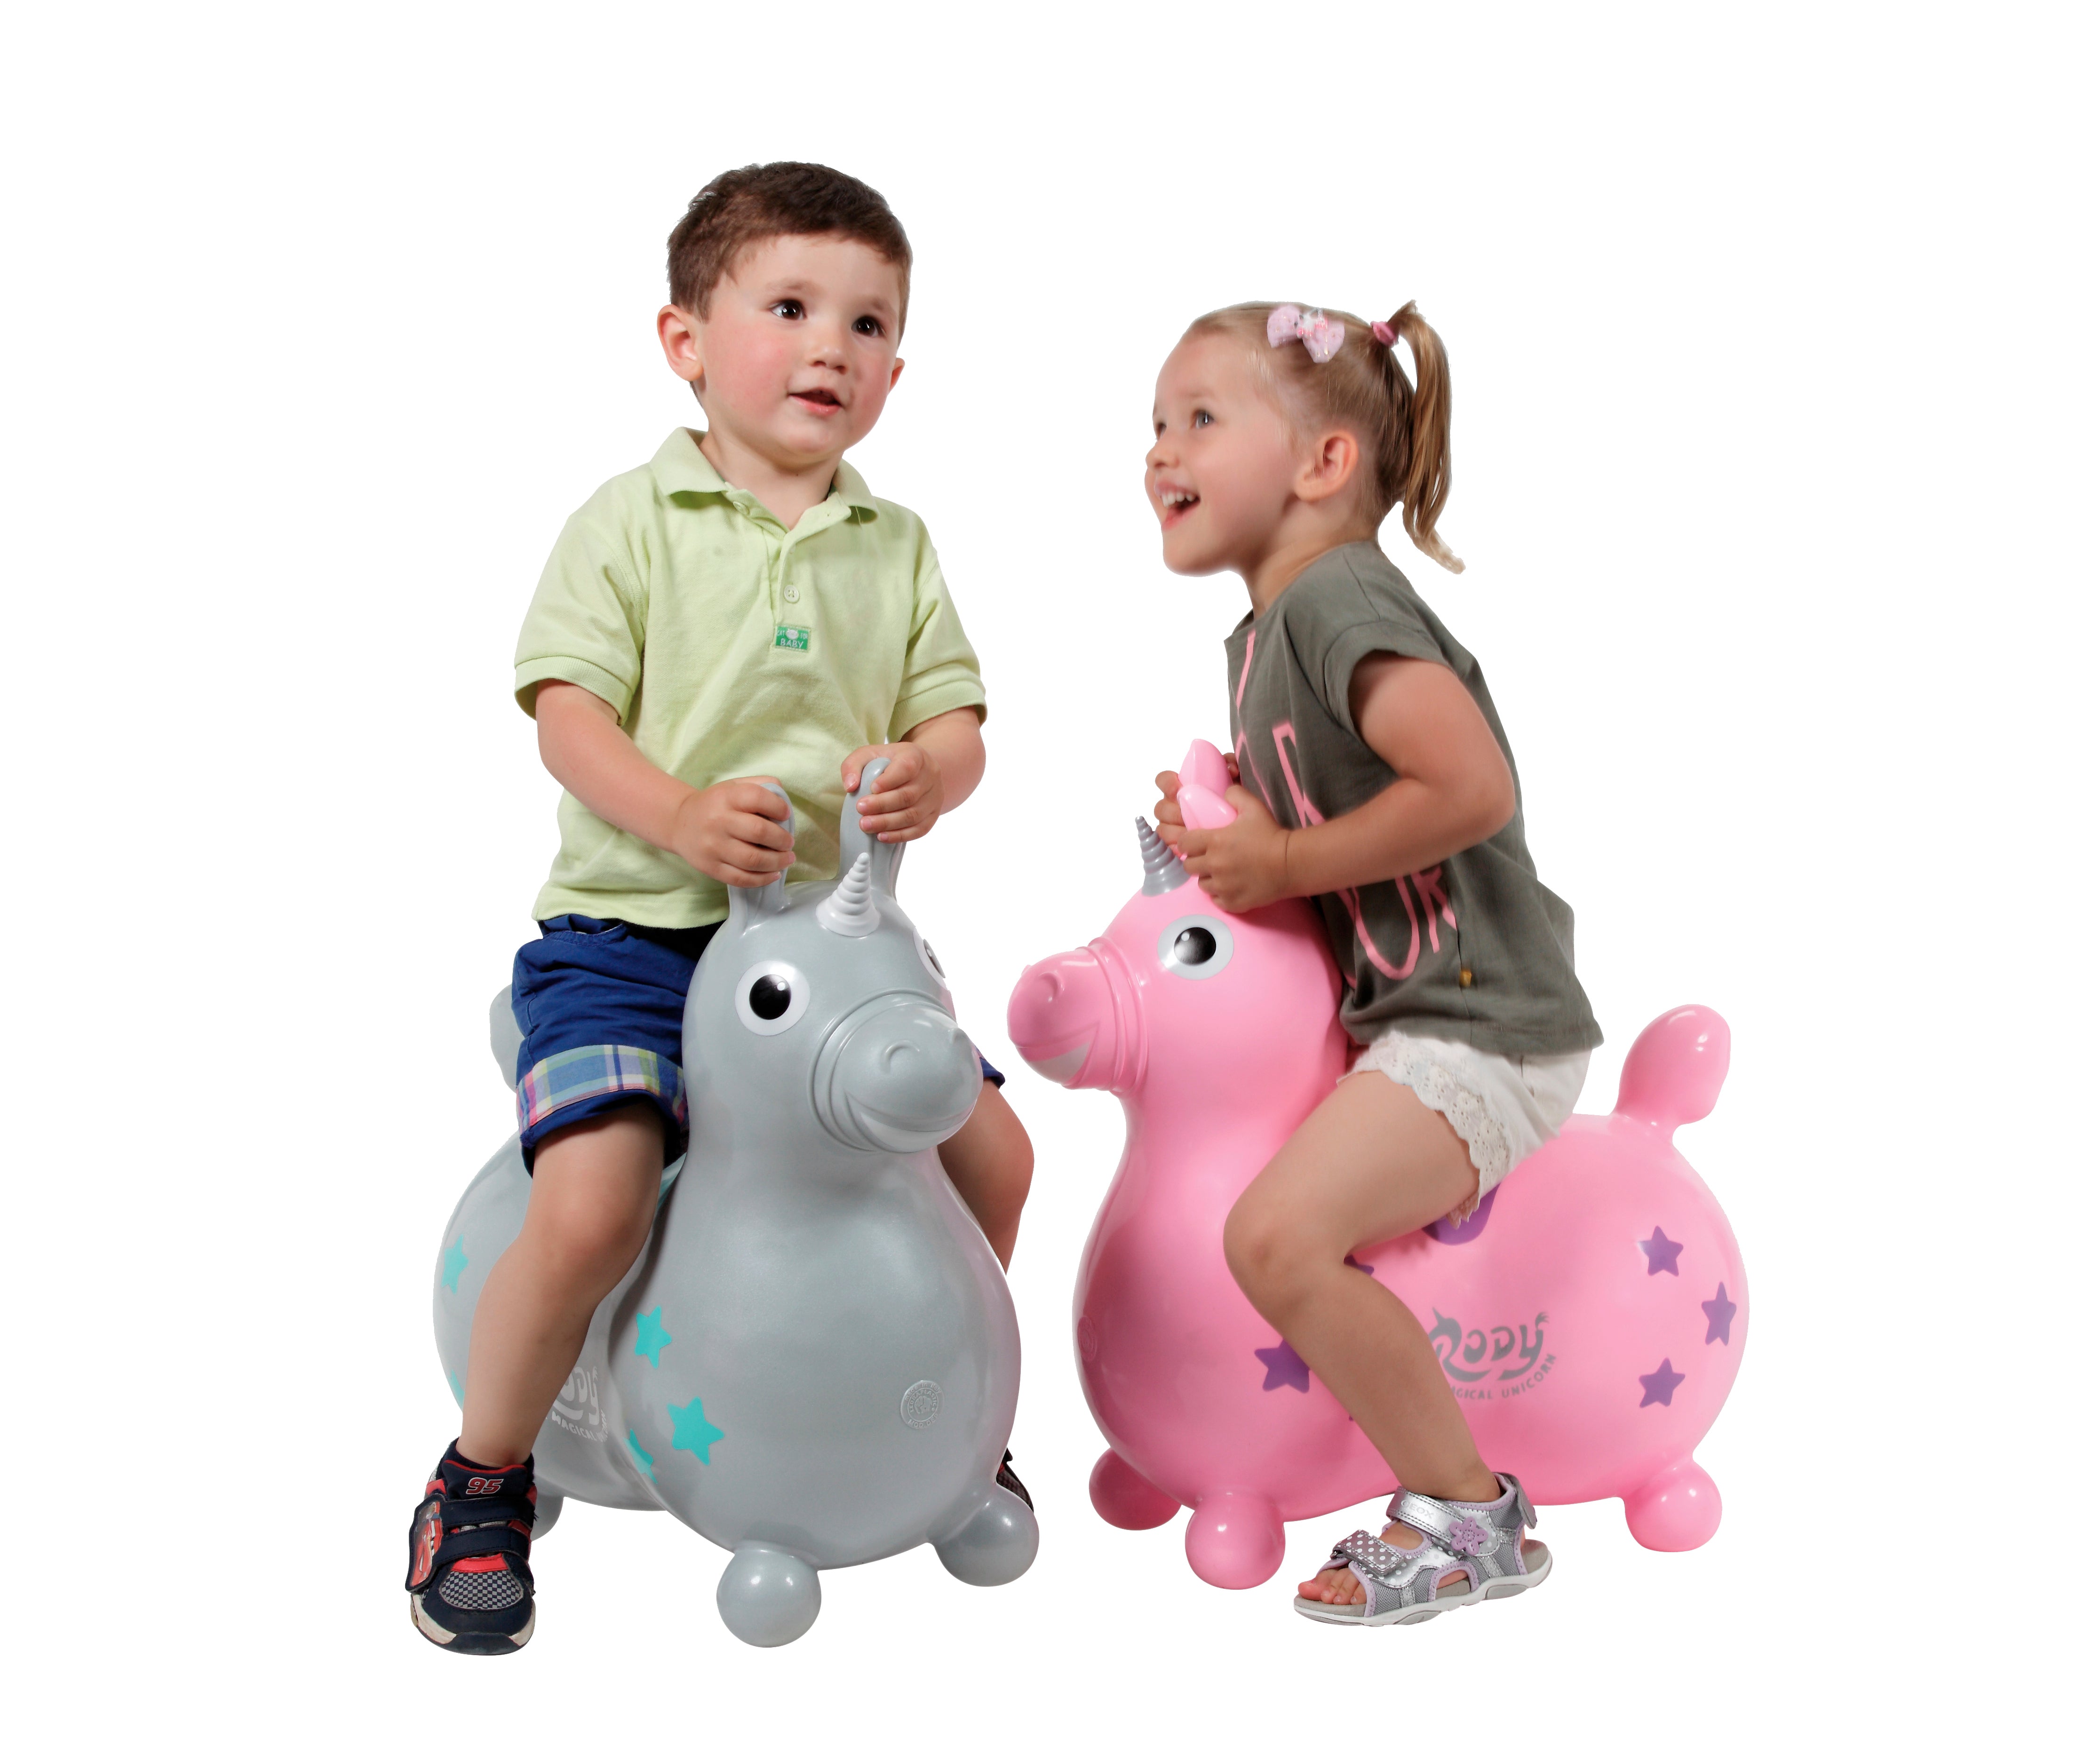 Studio image of the gray and pink Rody Magical Unicorns with  children sitting on them.